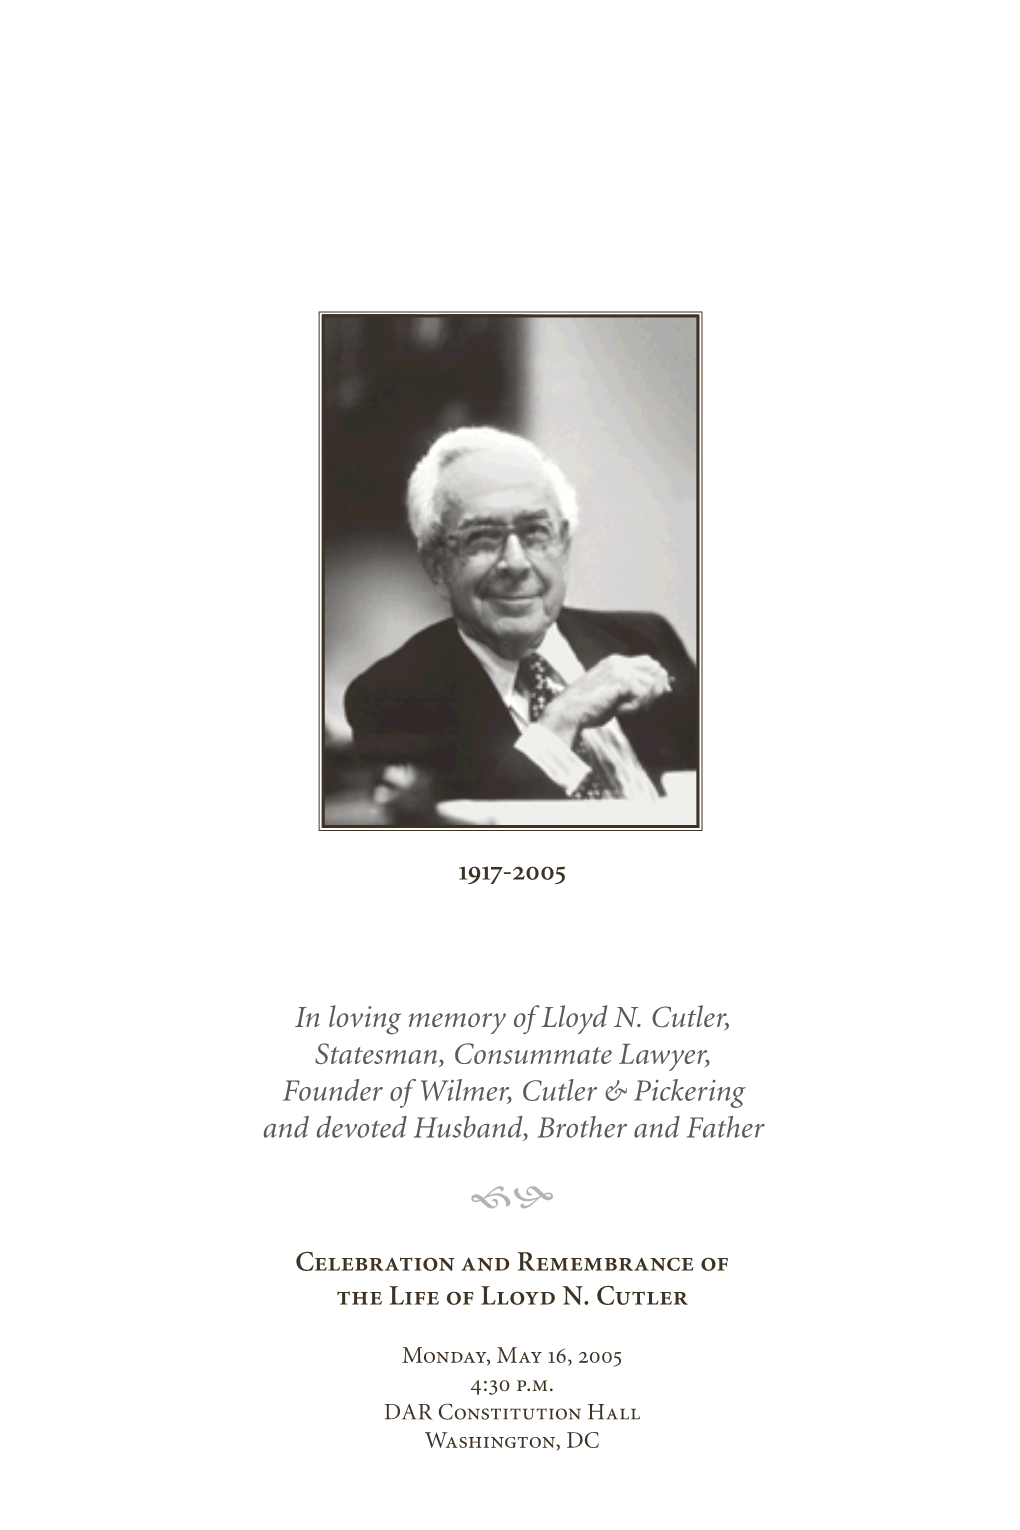 In Loving Memory of Lloyd N. Cutler, Statesman, Consummate Lawyer, Founder of Wilmer, Cutler & Pickering and Devoted Husband, Brother and Father Fh